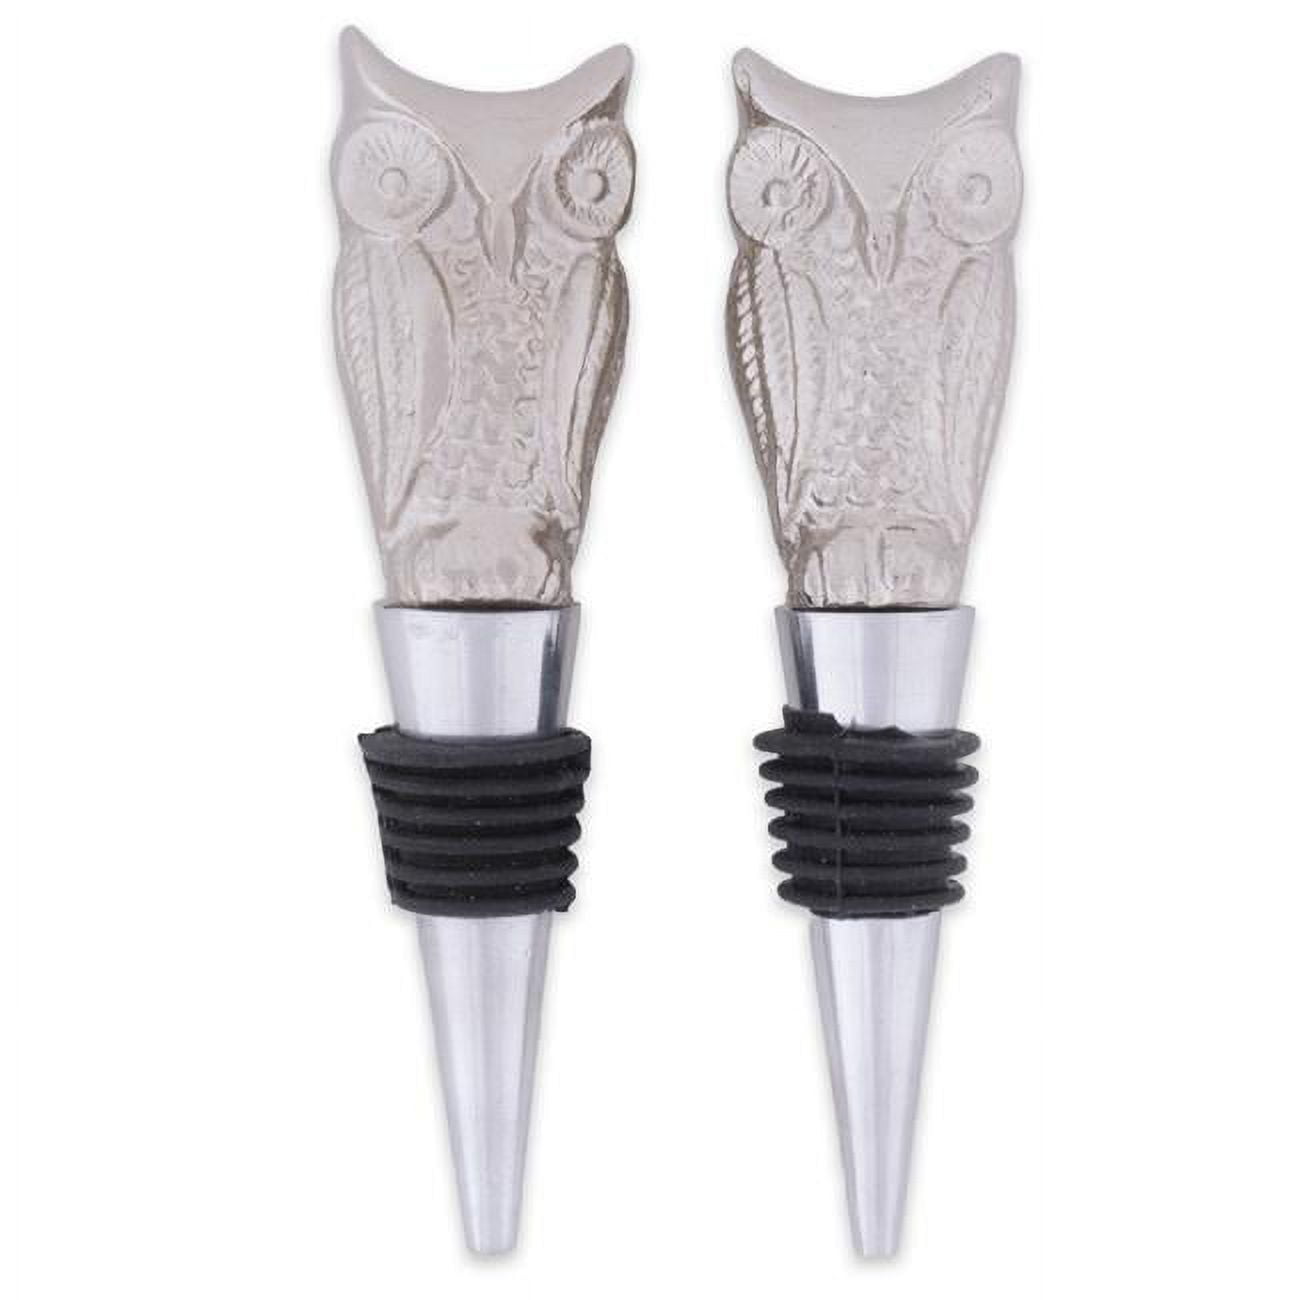 Picture of Design Imports CAMZ10677 Silver Owl Bottle Stopper - Set of 2